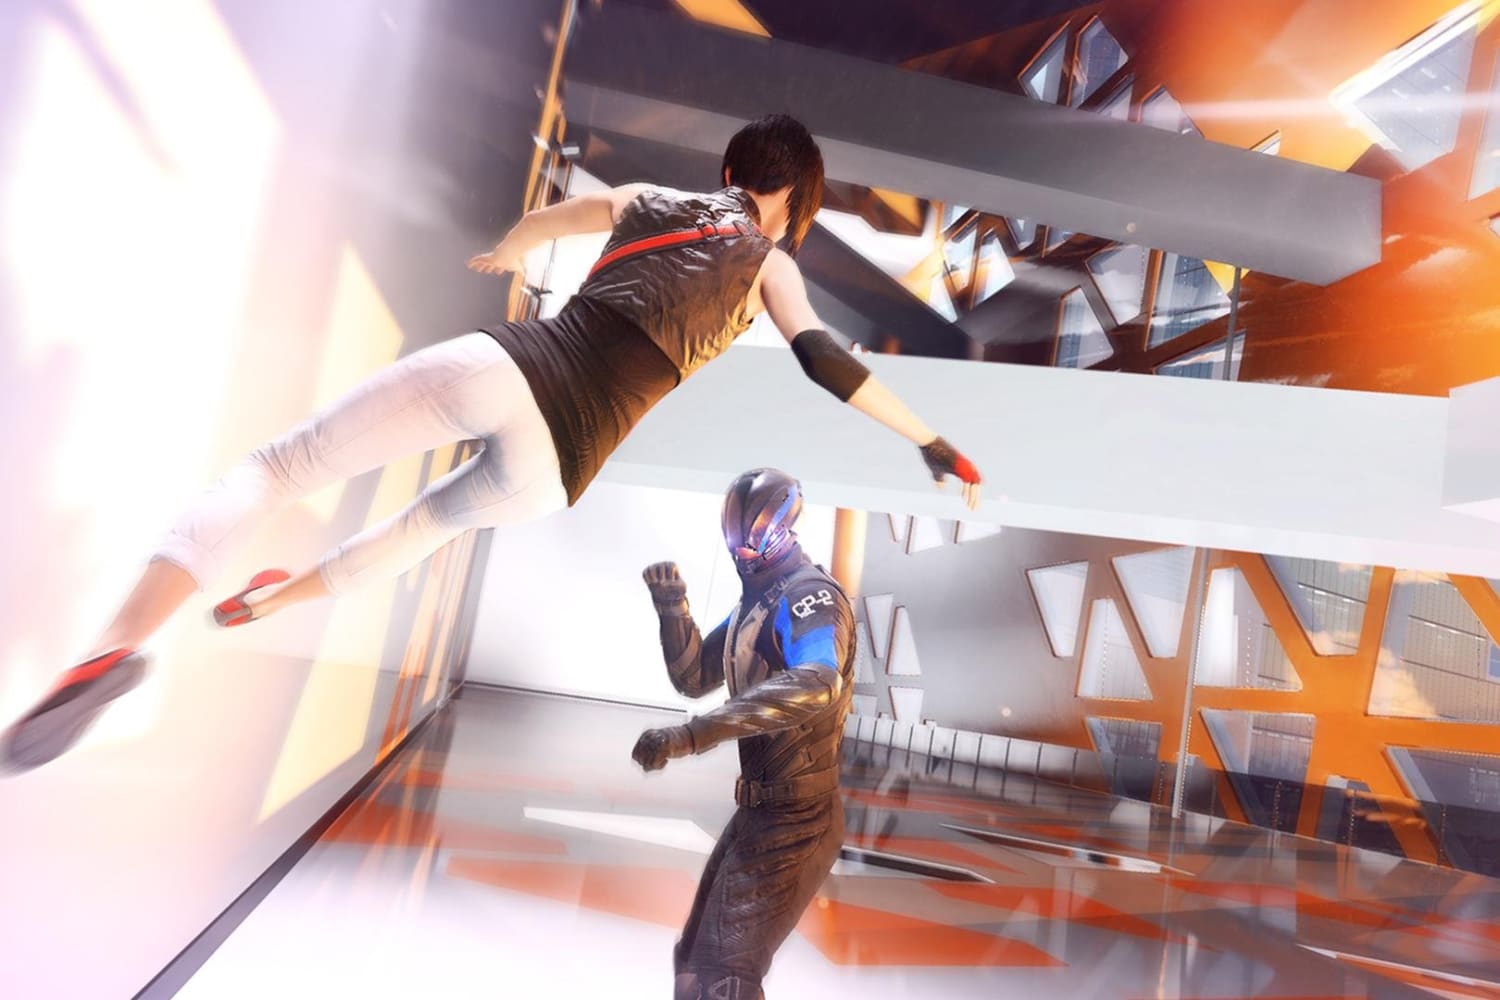  Mirror's Edge Catalyst - Xbox One : Electronic Arts: Everything  Else